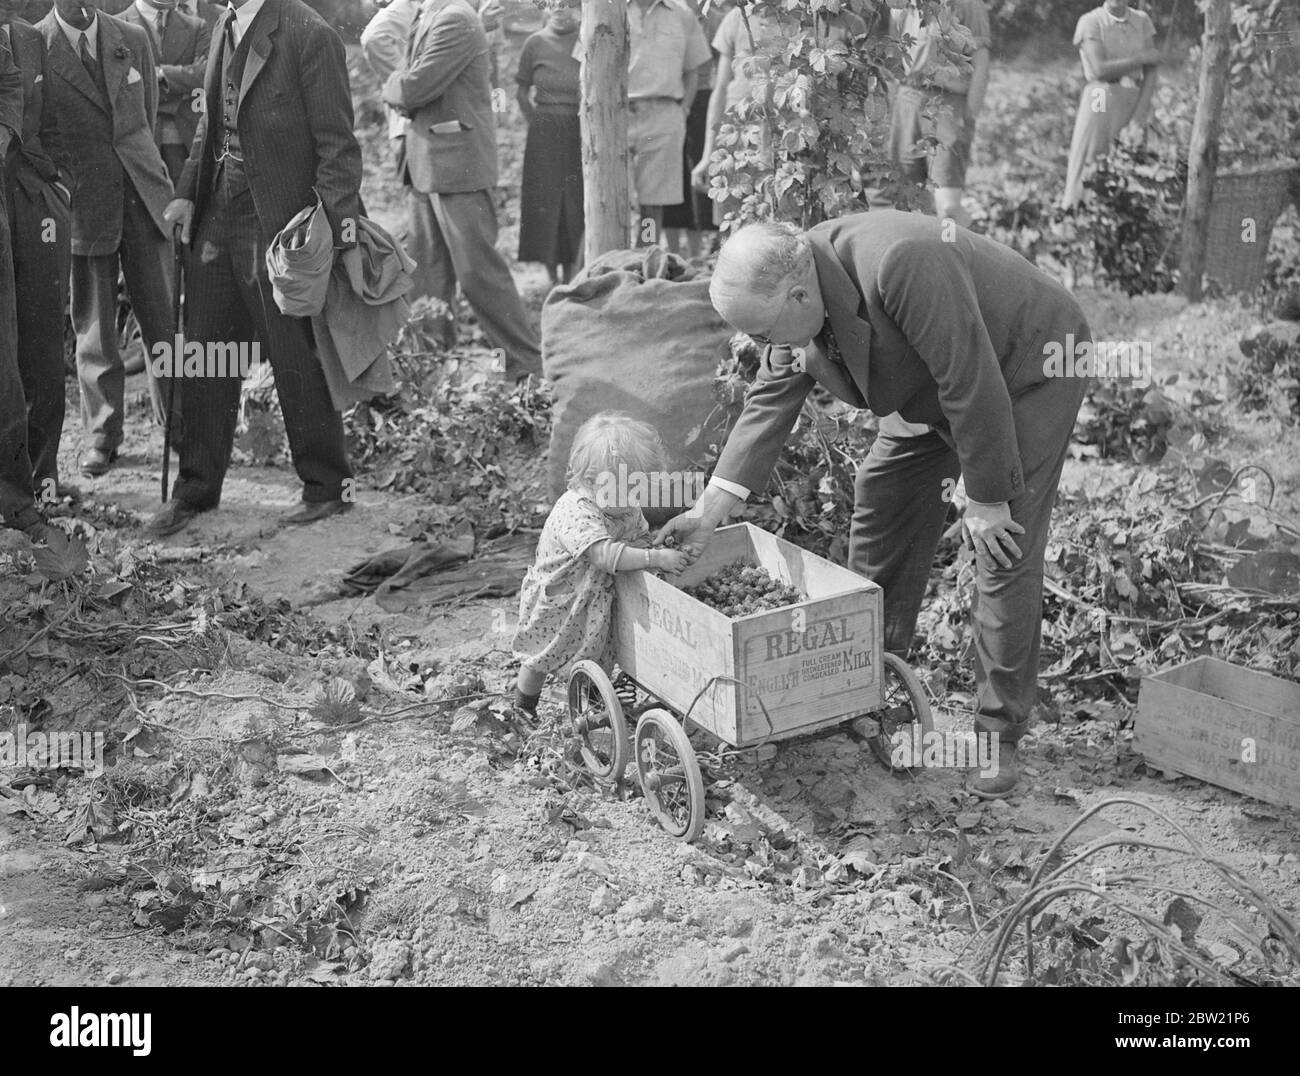 Sir Kingsley Wood, the Minister of Health, helping the smallest picker when he visited hop pickers in the fields of Lord Walmer's farm near Selborne during his tour of Hampshire hop fields. New regulations affecting the hop pickers have only this year been issued by the Ministry of Health. 2 September 1937 Stock Photo